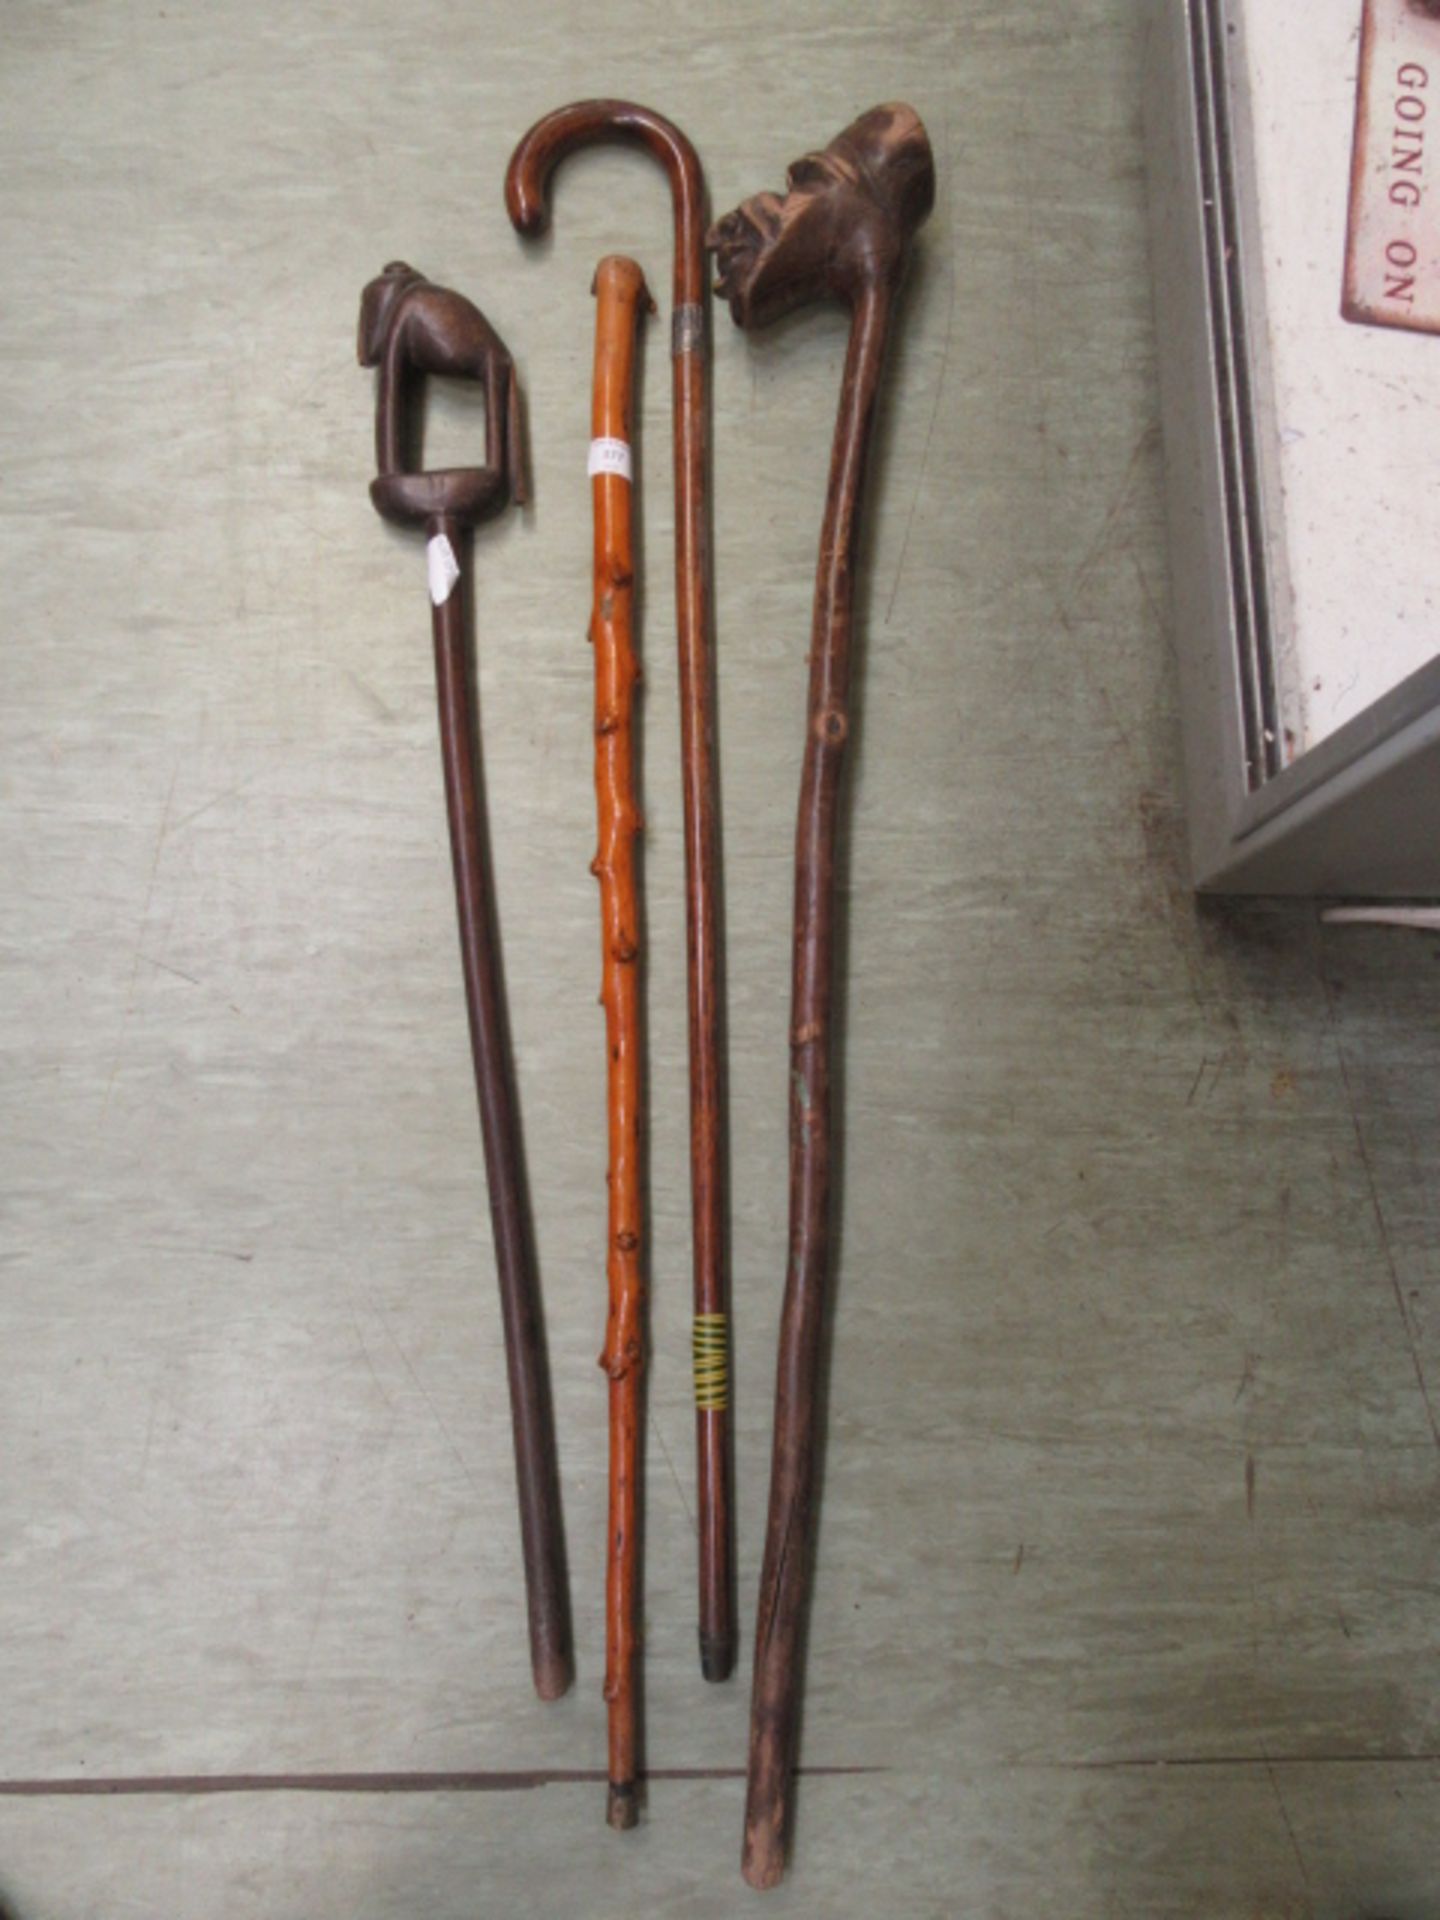 A selection of walking sticks and canes